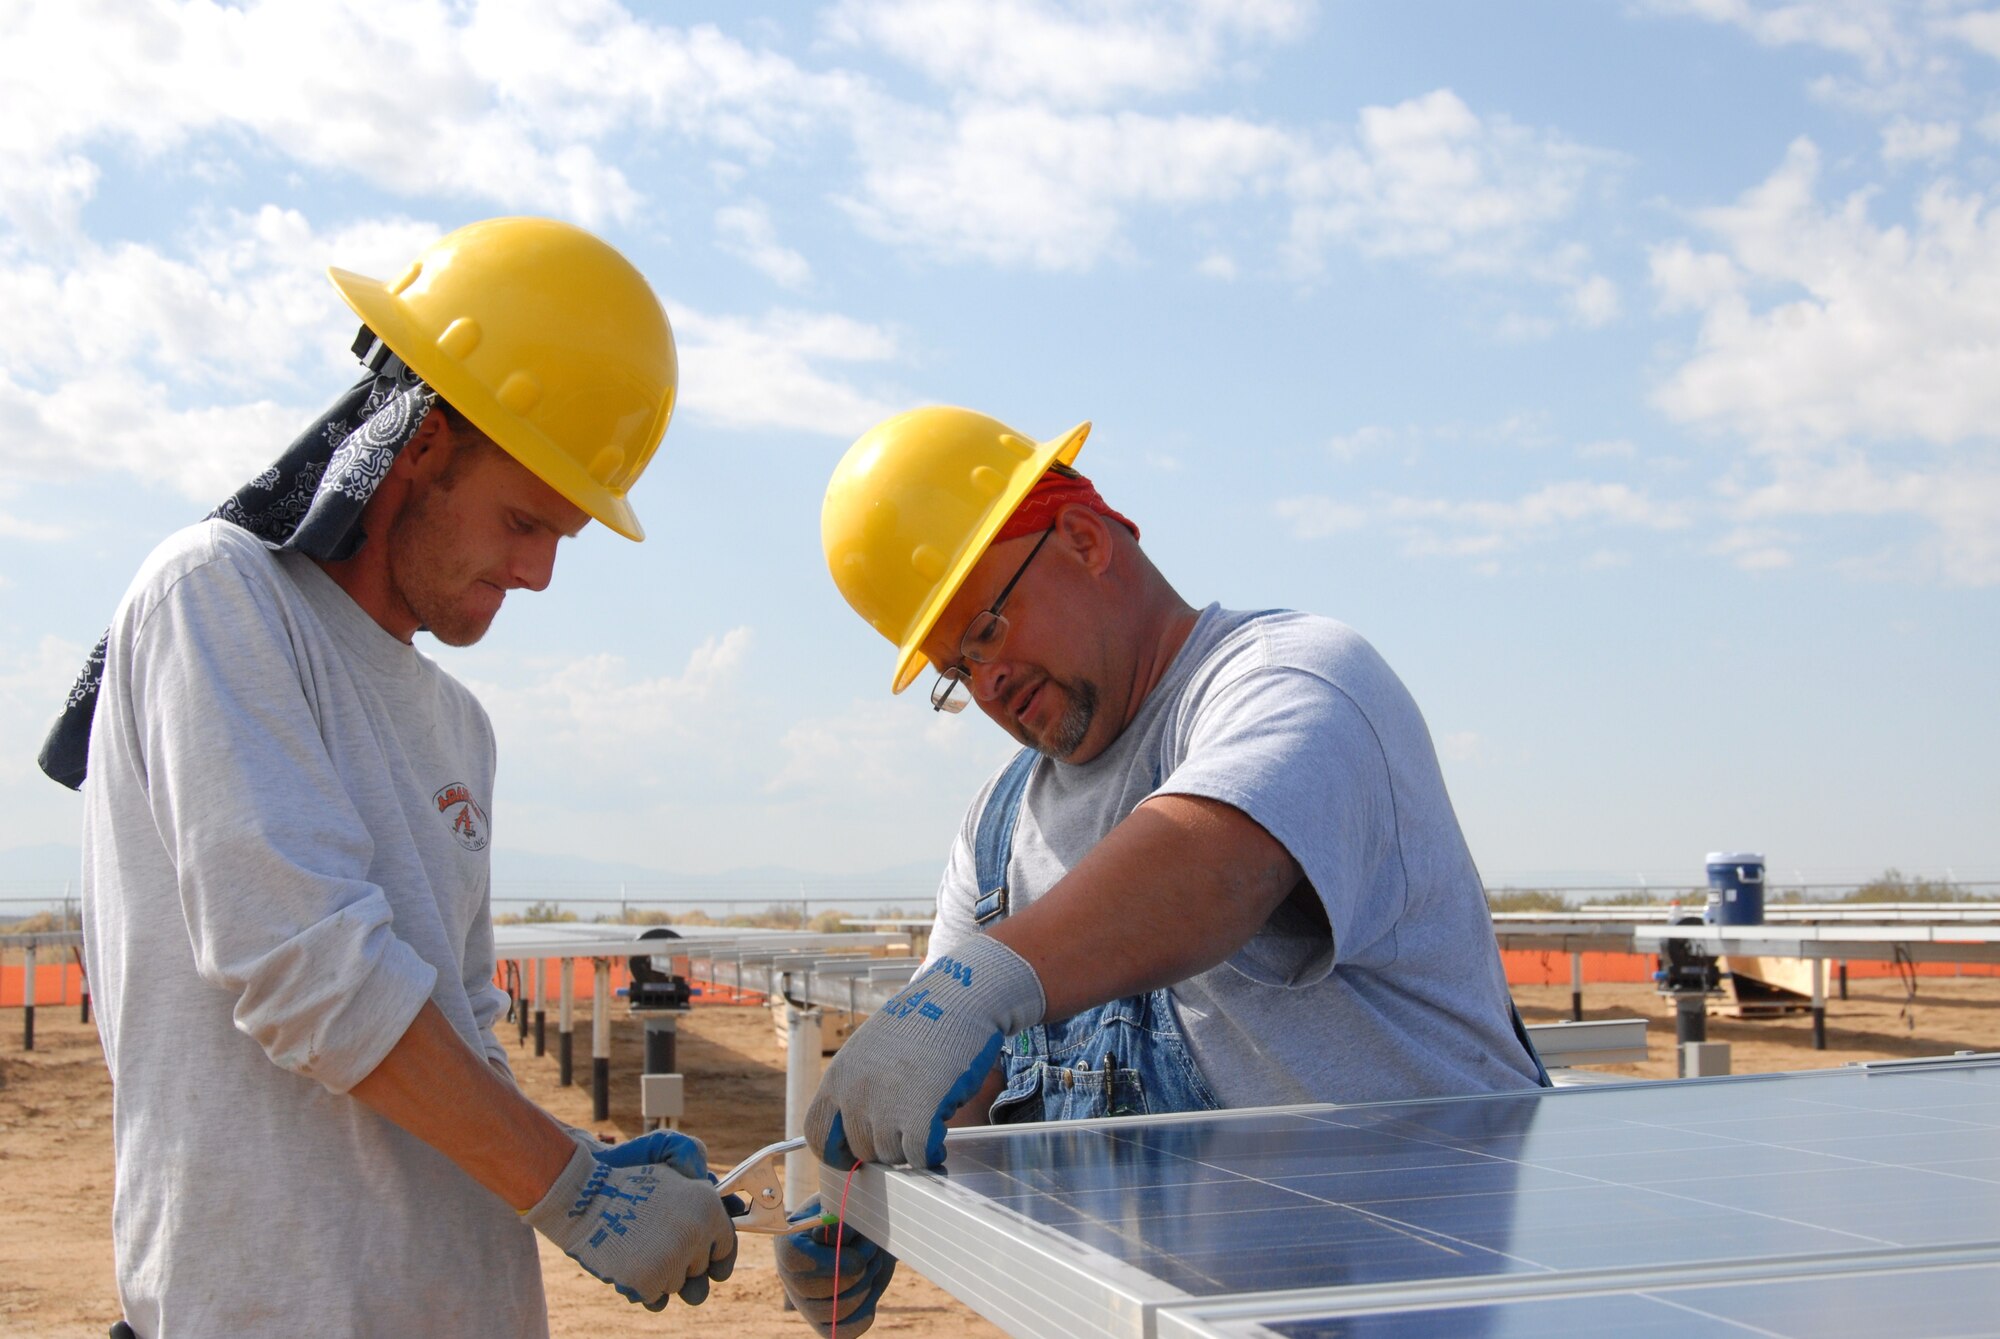 Contract construction workers attach a solar panel to a stand at the Lancaster Boulevard solar farm near Wolfe Avenue. Three solar farms are being constructed around base including one at the Air Force Research Laboratory Detachment 7. Each of the solar farms is expected to provide one megawatt of electricity to the base, and officials hope the extra supplement of power will save the base money. The solar farms are expected to be completed around the end of the year. (Air Force photo by Dawn Waldman)